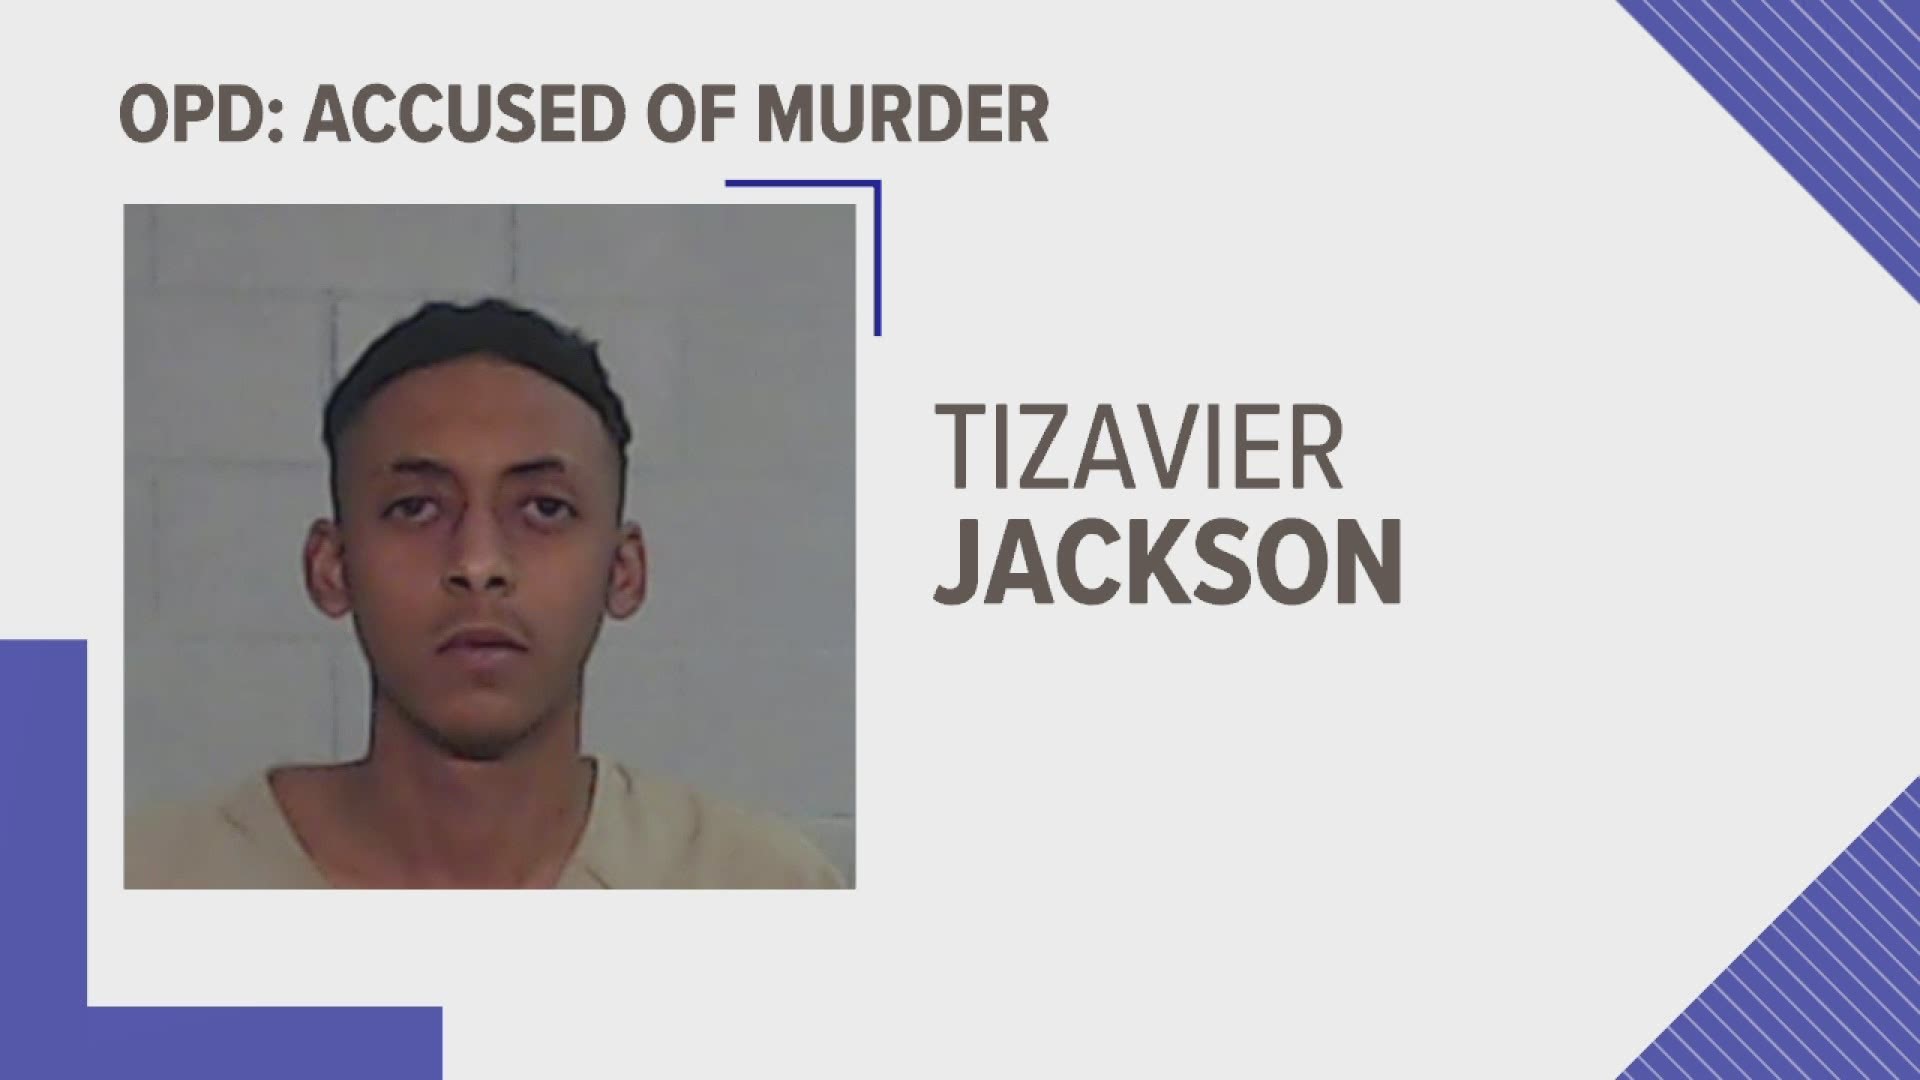 Odessa Police say Tizavier Jackson shot and killed 18-year-old Emanuel Urias, two other young men were also injured.